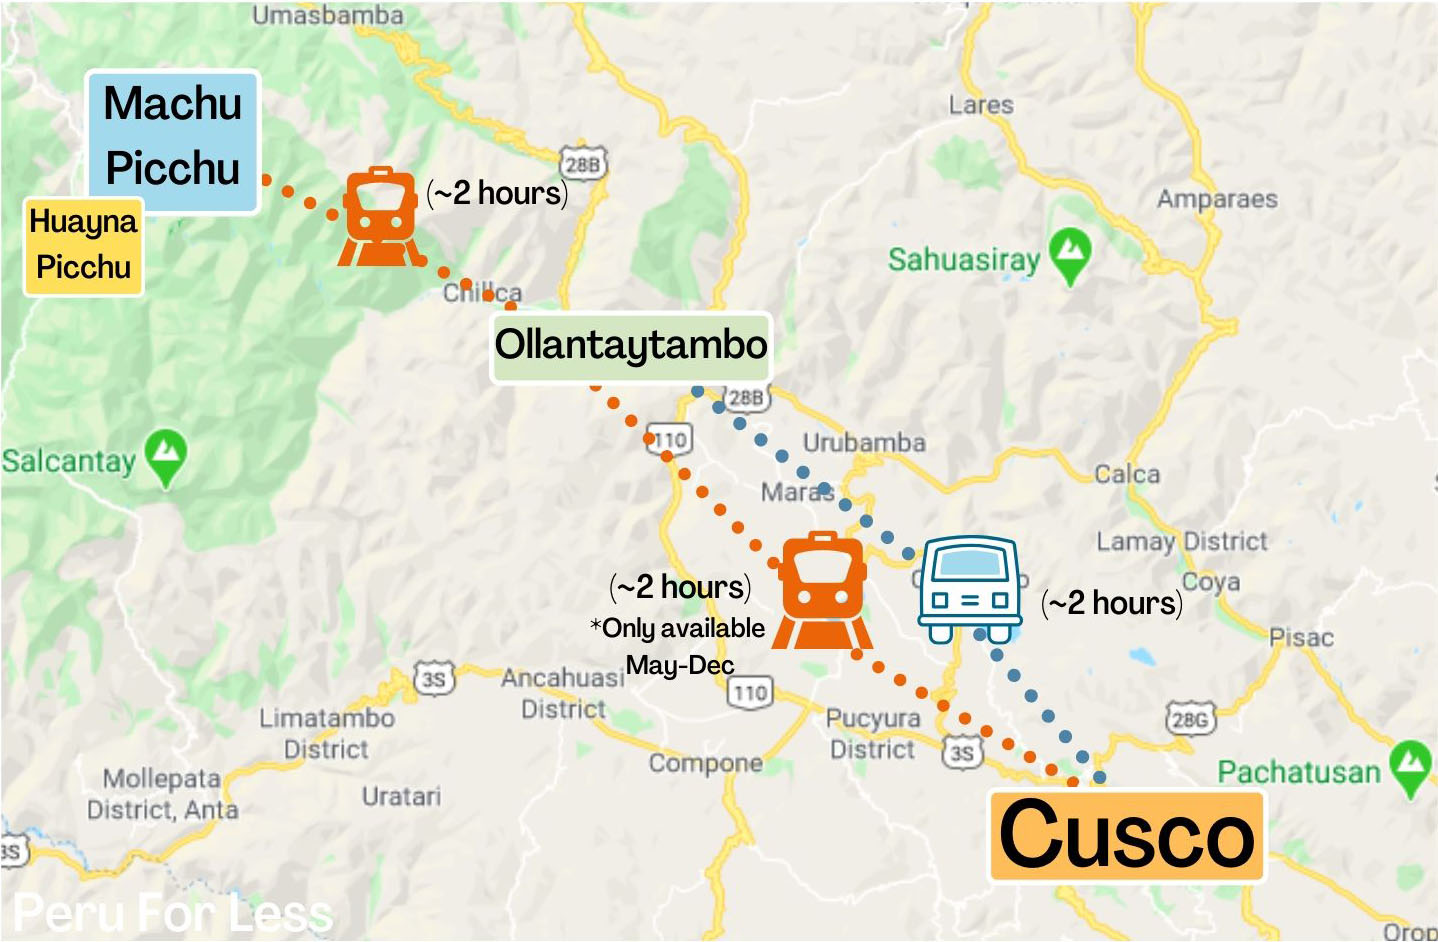 A detailed map showing the route from Cusco to Machu Picchu and the transportation options.